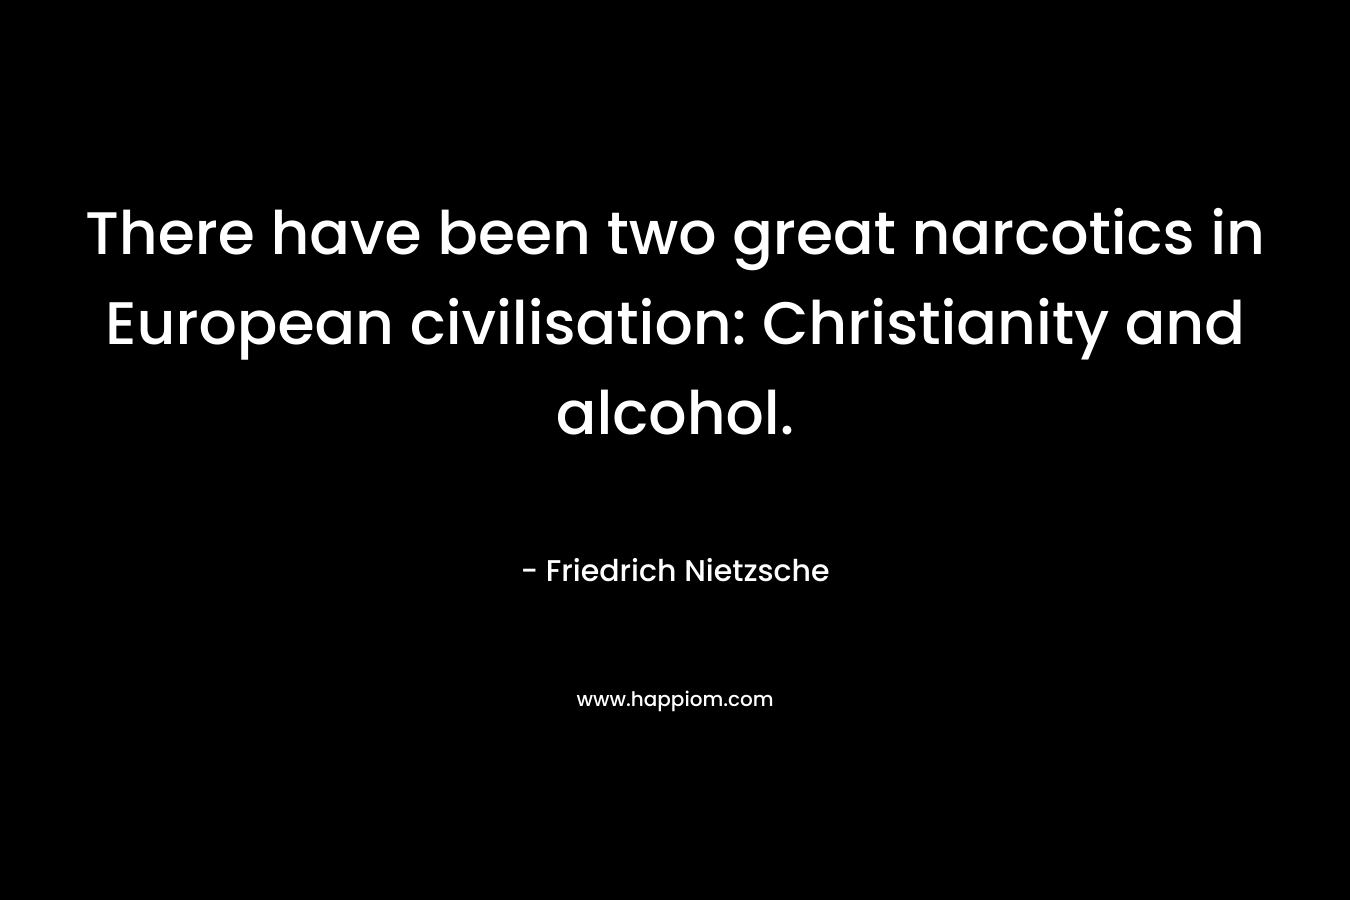 There have been two great narcotics in European civilisation: Christianity and alcohol. – Friedrich Nietzsche